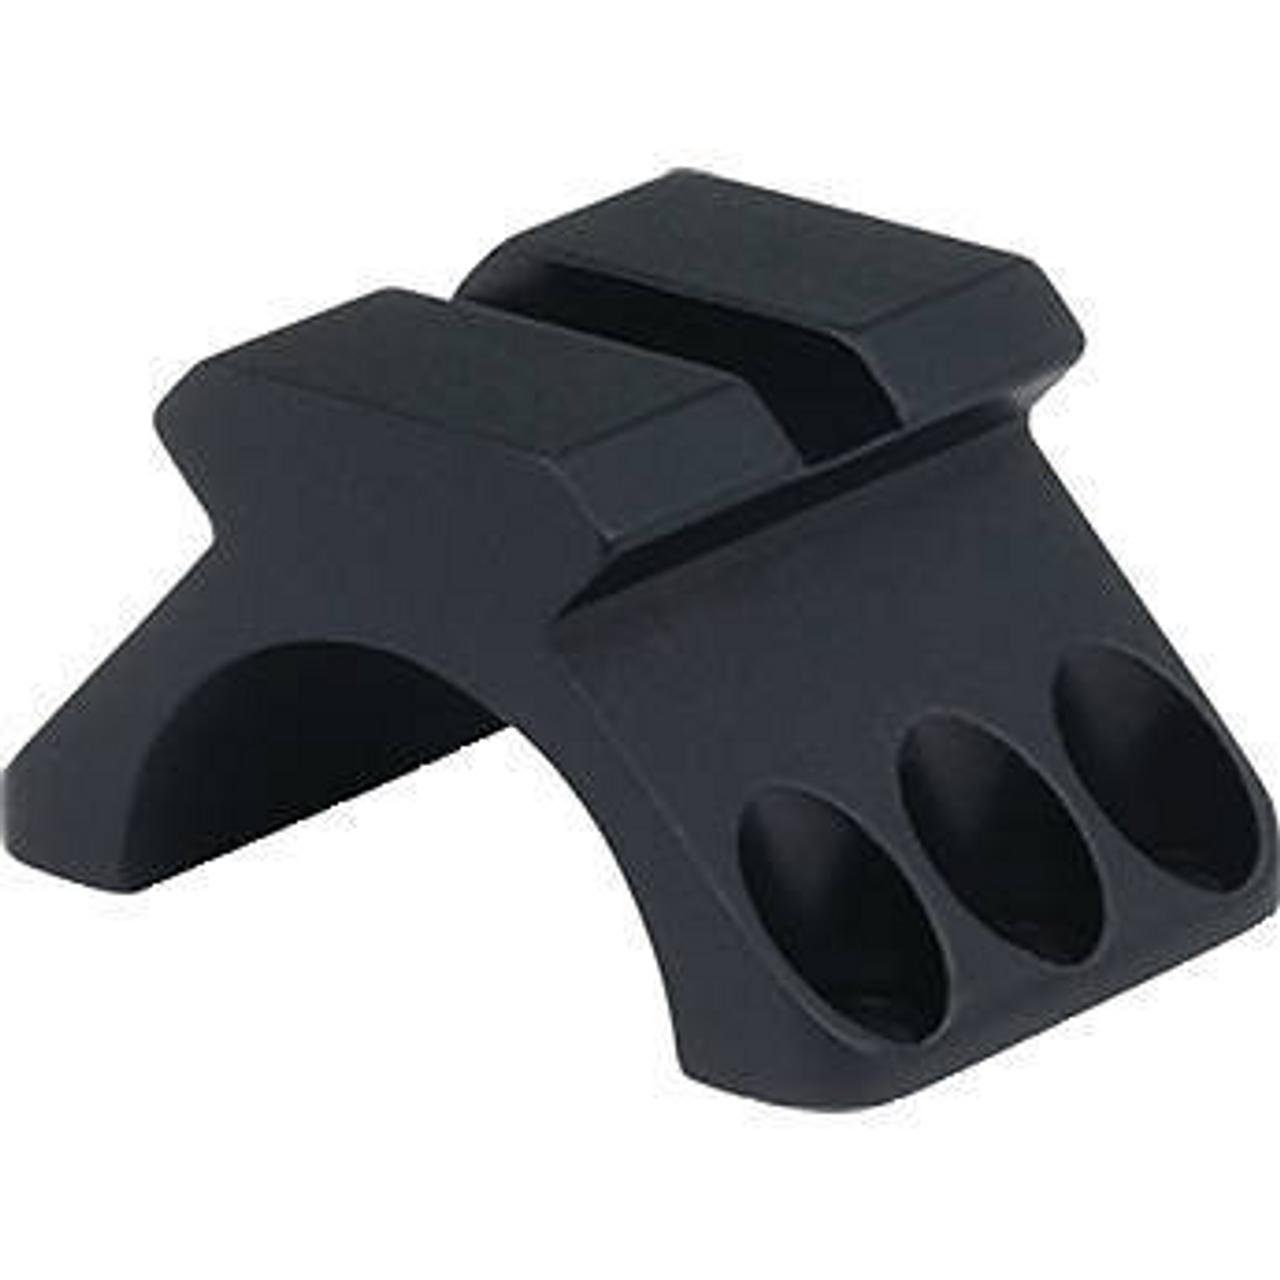 Weaver Tactical Picatinny Ring Cap 30mm W Rail Section